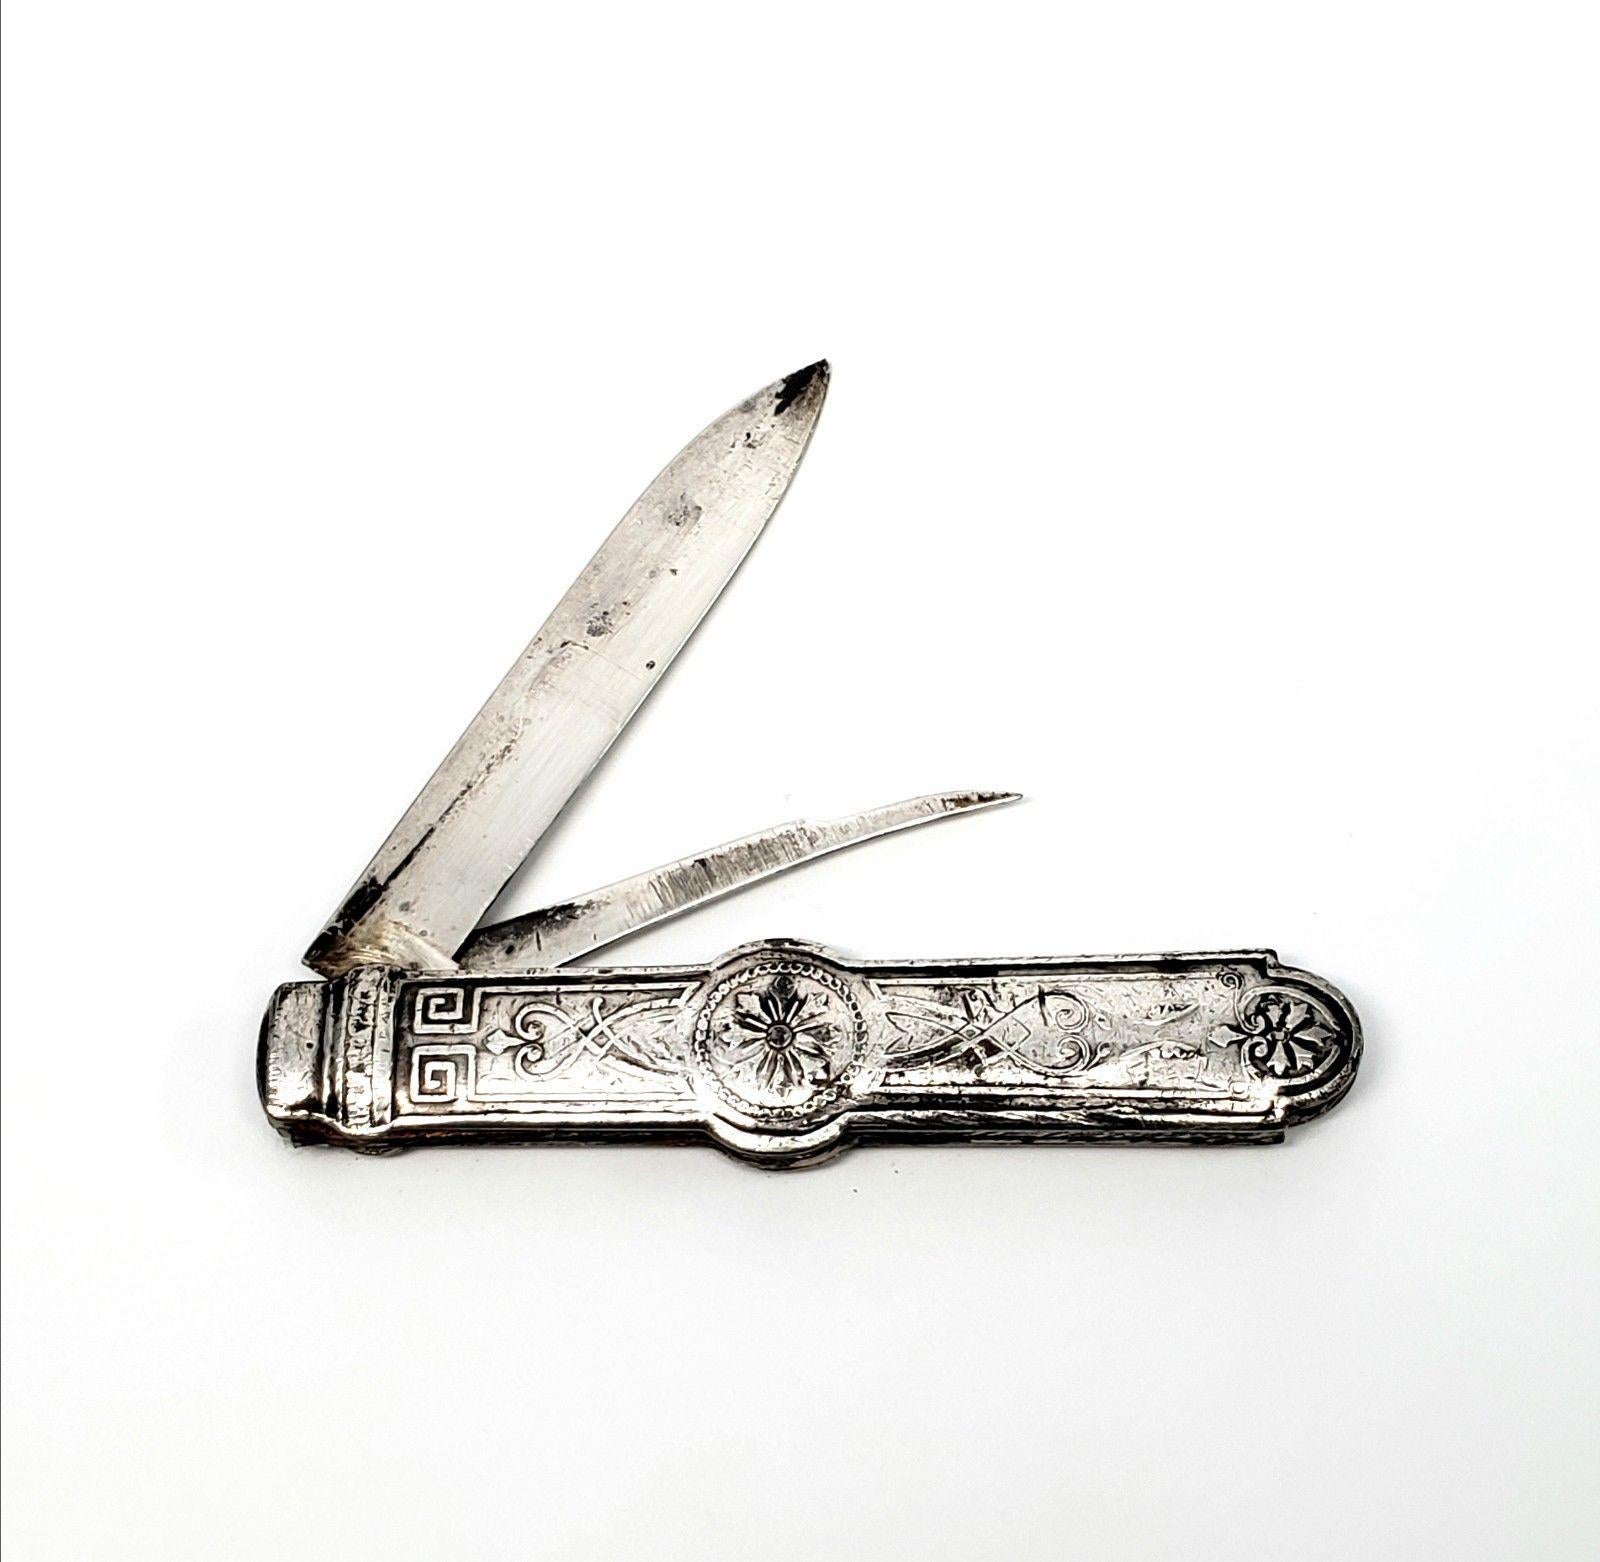 Gorham sterling silver pocket knife with straight blade and nut pick. No monogram. Measures approx 3 1/8